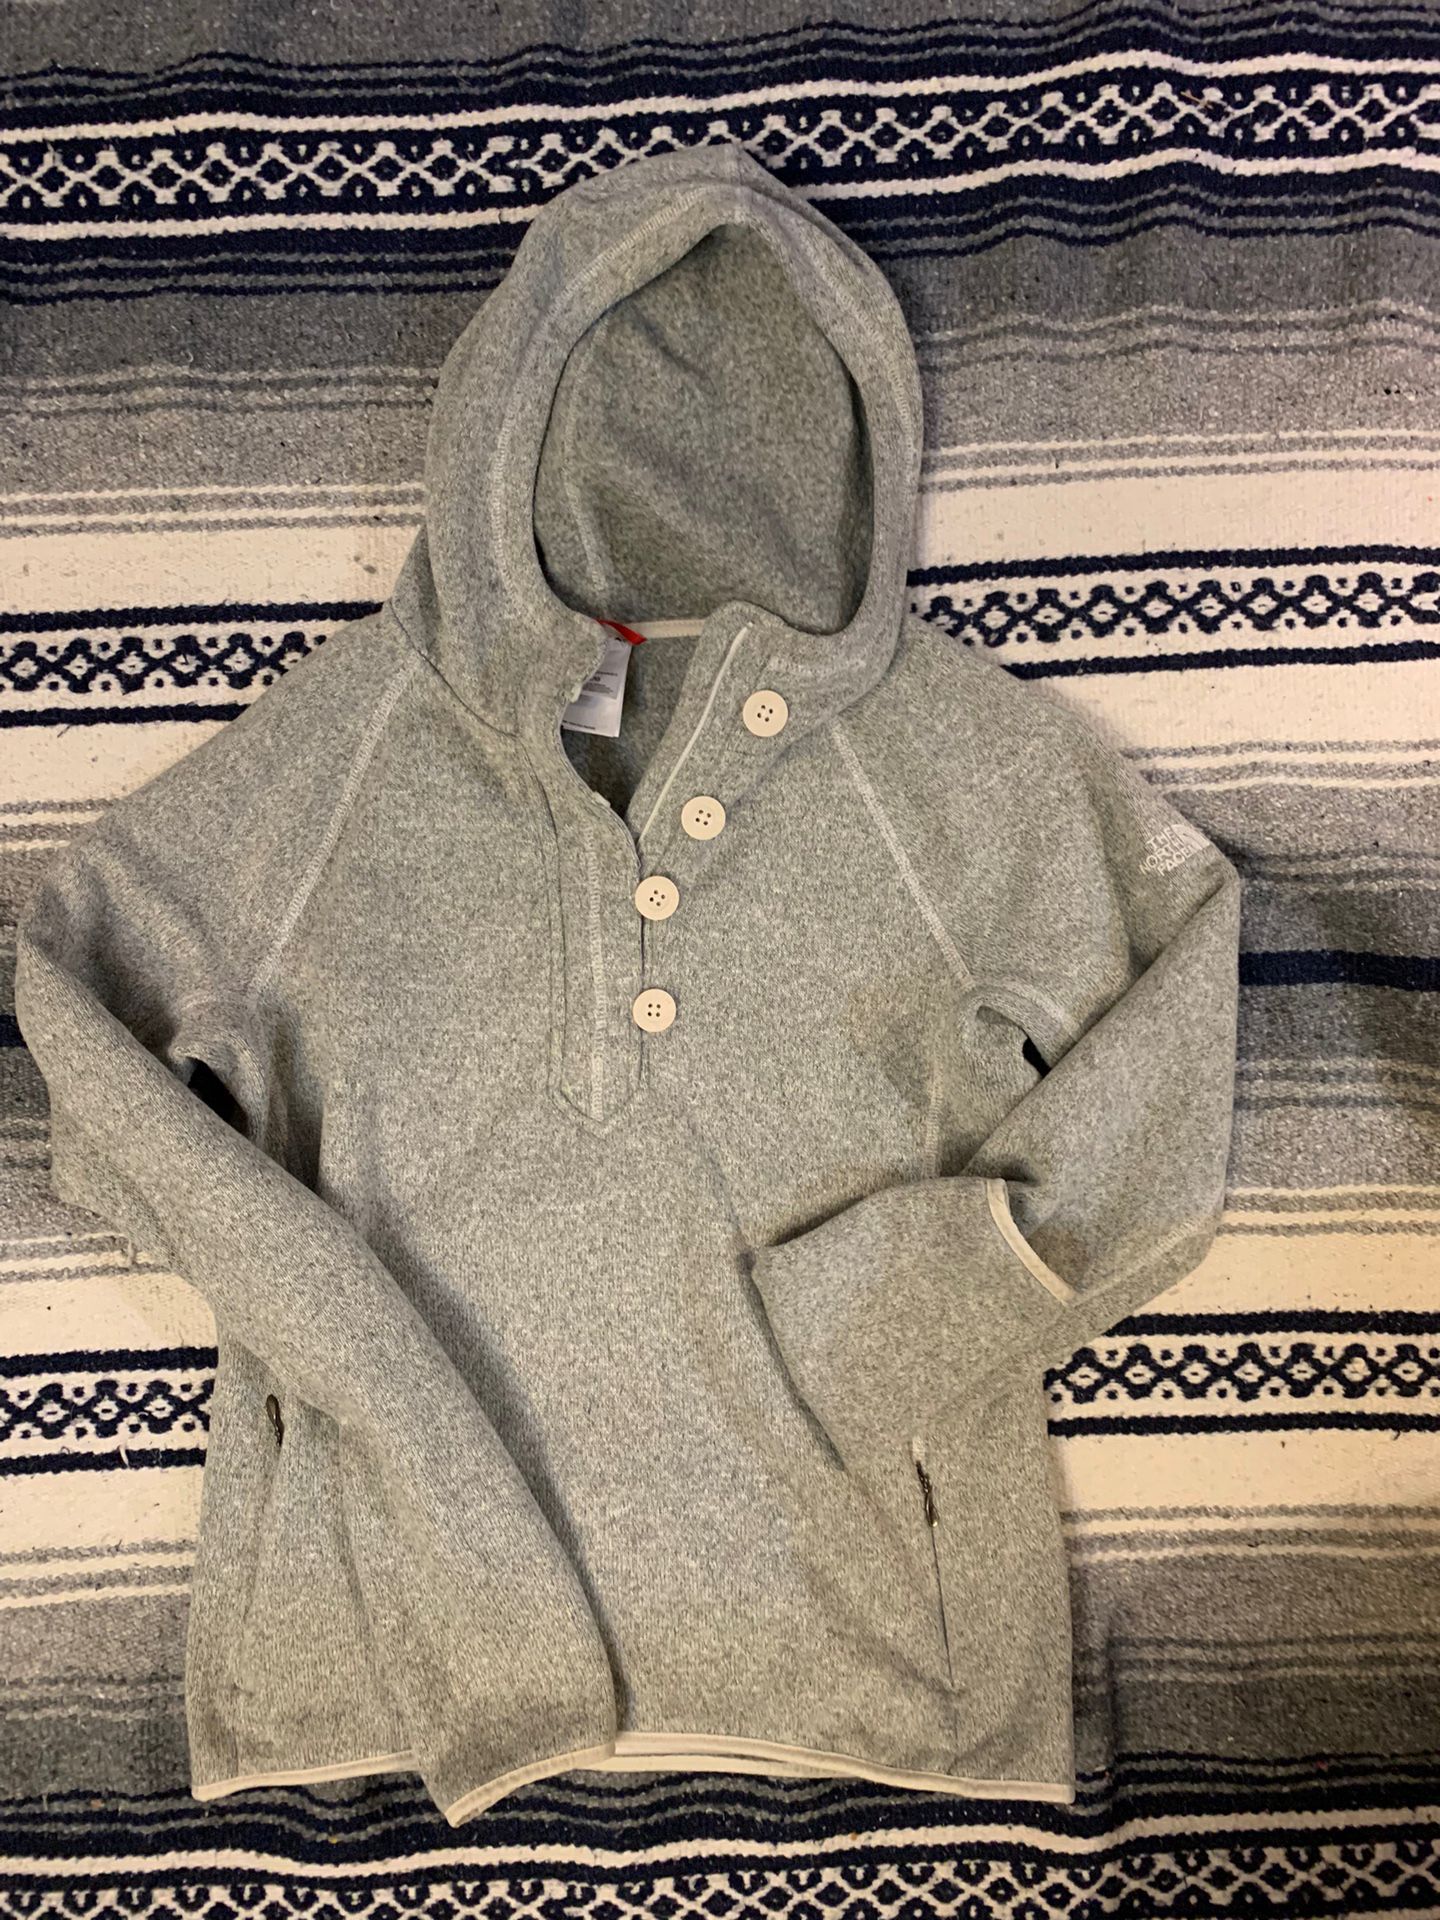 The North Face 1/4 Button Hoodie Sweater Sweatshirt Gray Women's Size Large